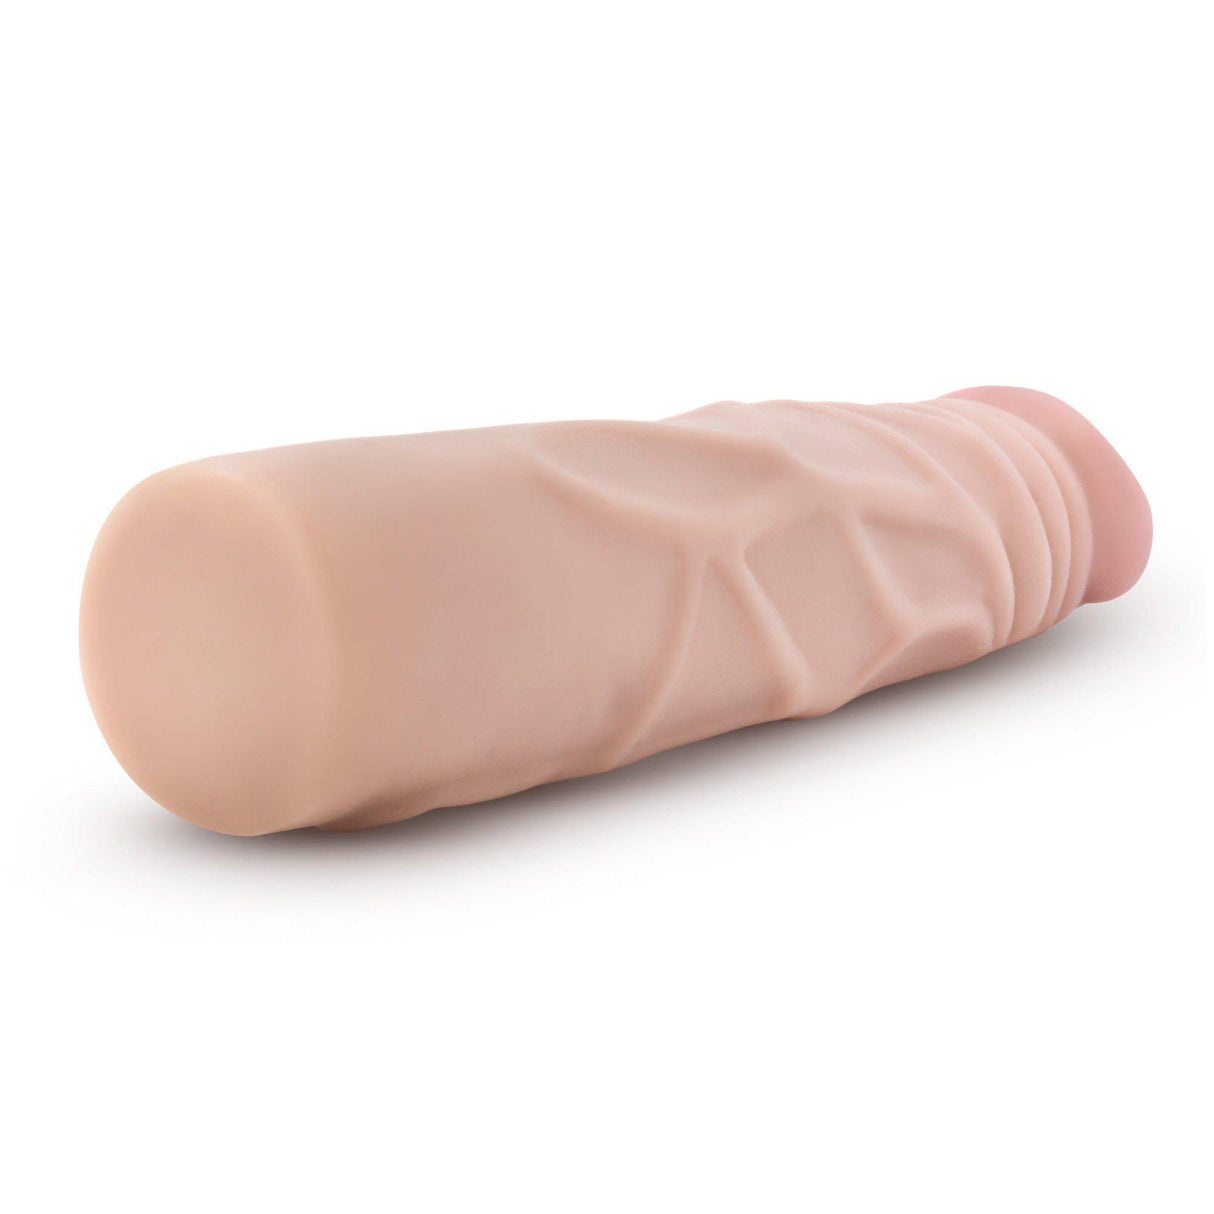 Blush X5 Plus 7.5 Inch Cock with Flexible Spine